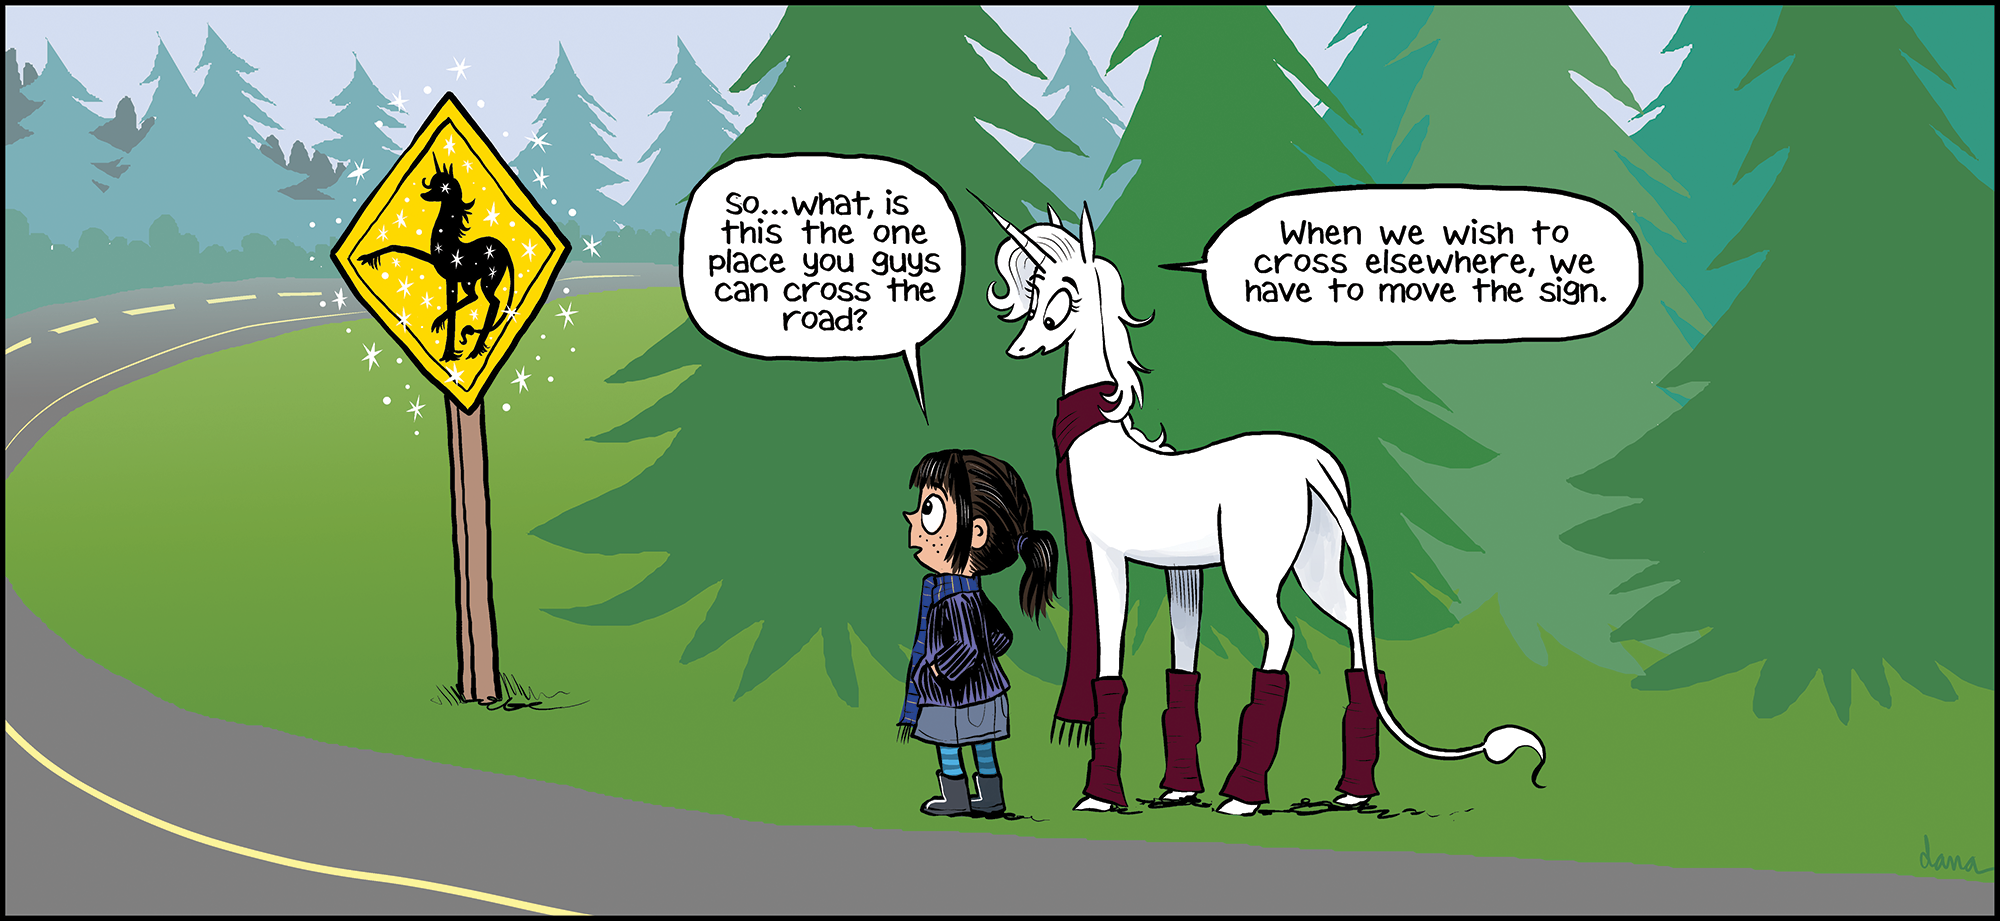 From Unicorn Crossing: Another Phoebe and Her Unicorn Adventure